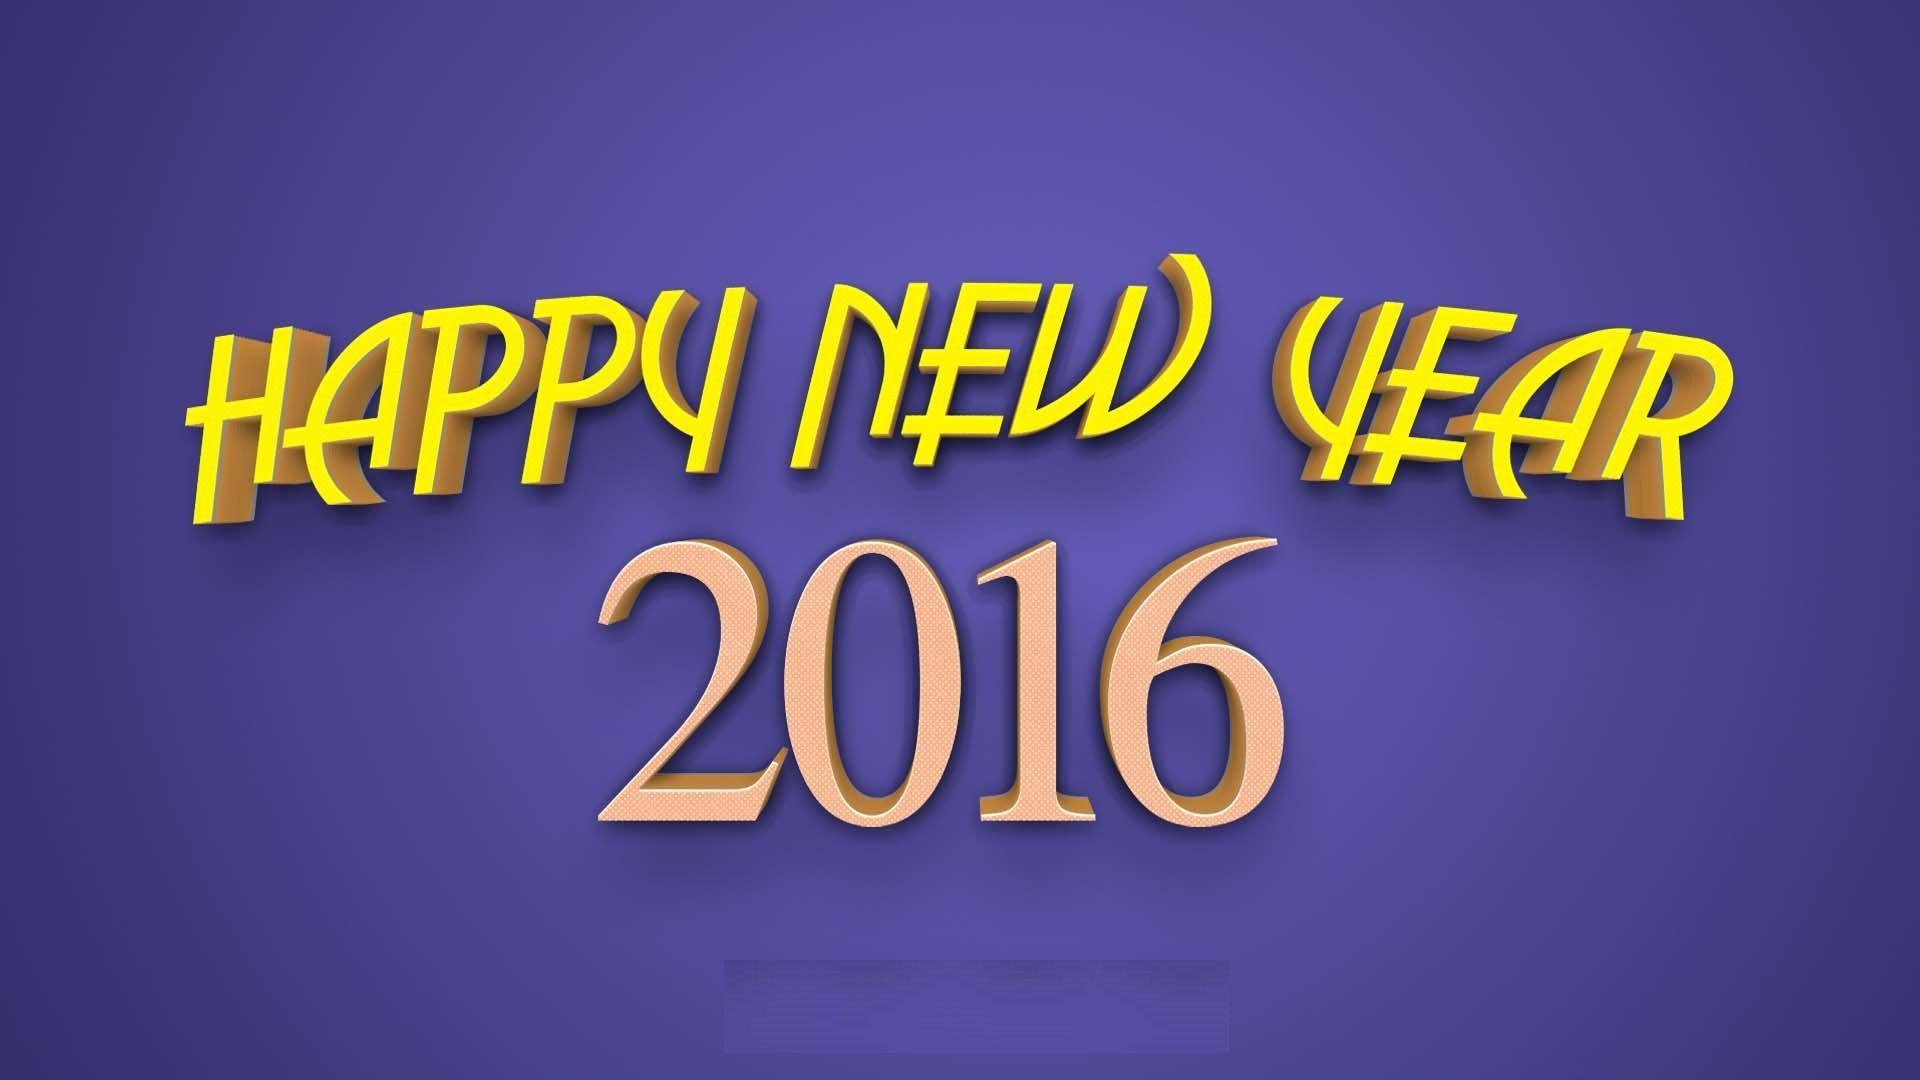 New Year 2016 Wallpaper, background and Windows 10 Theme